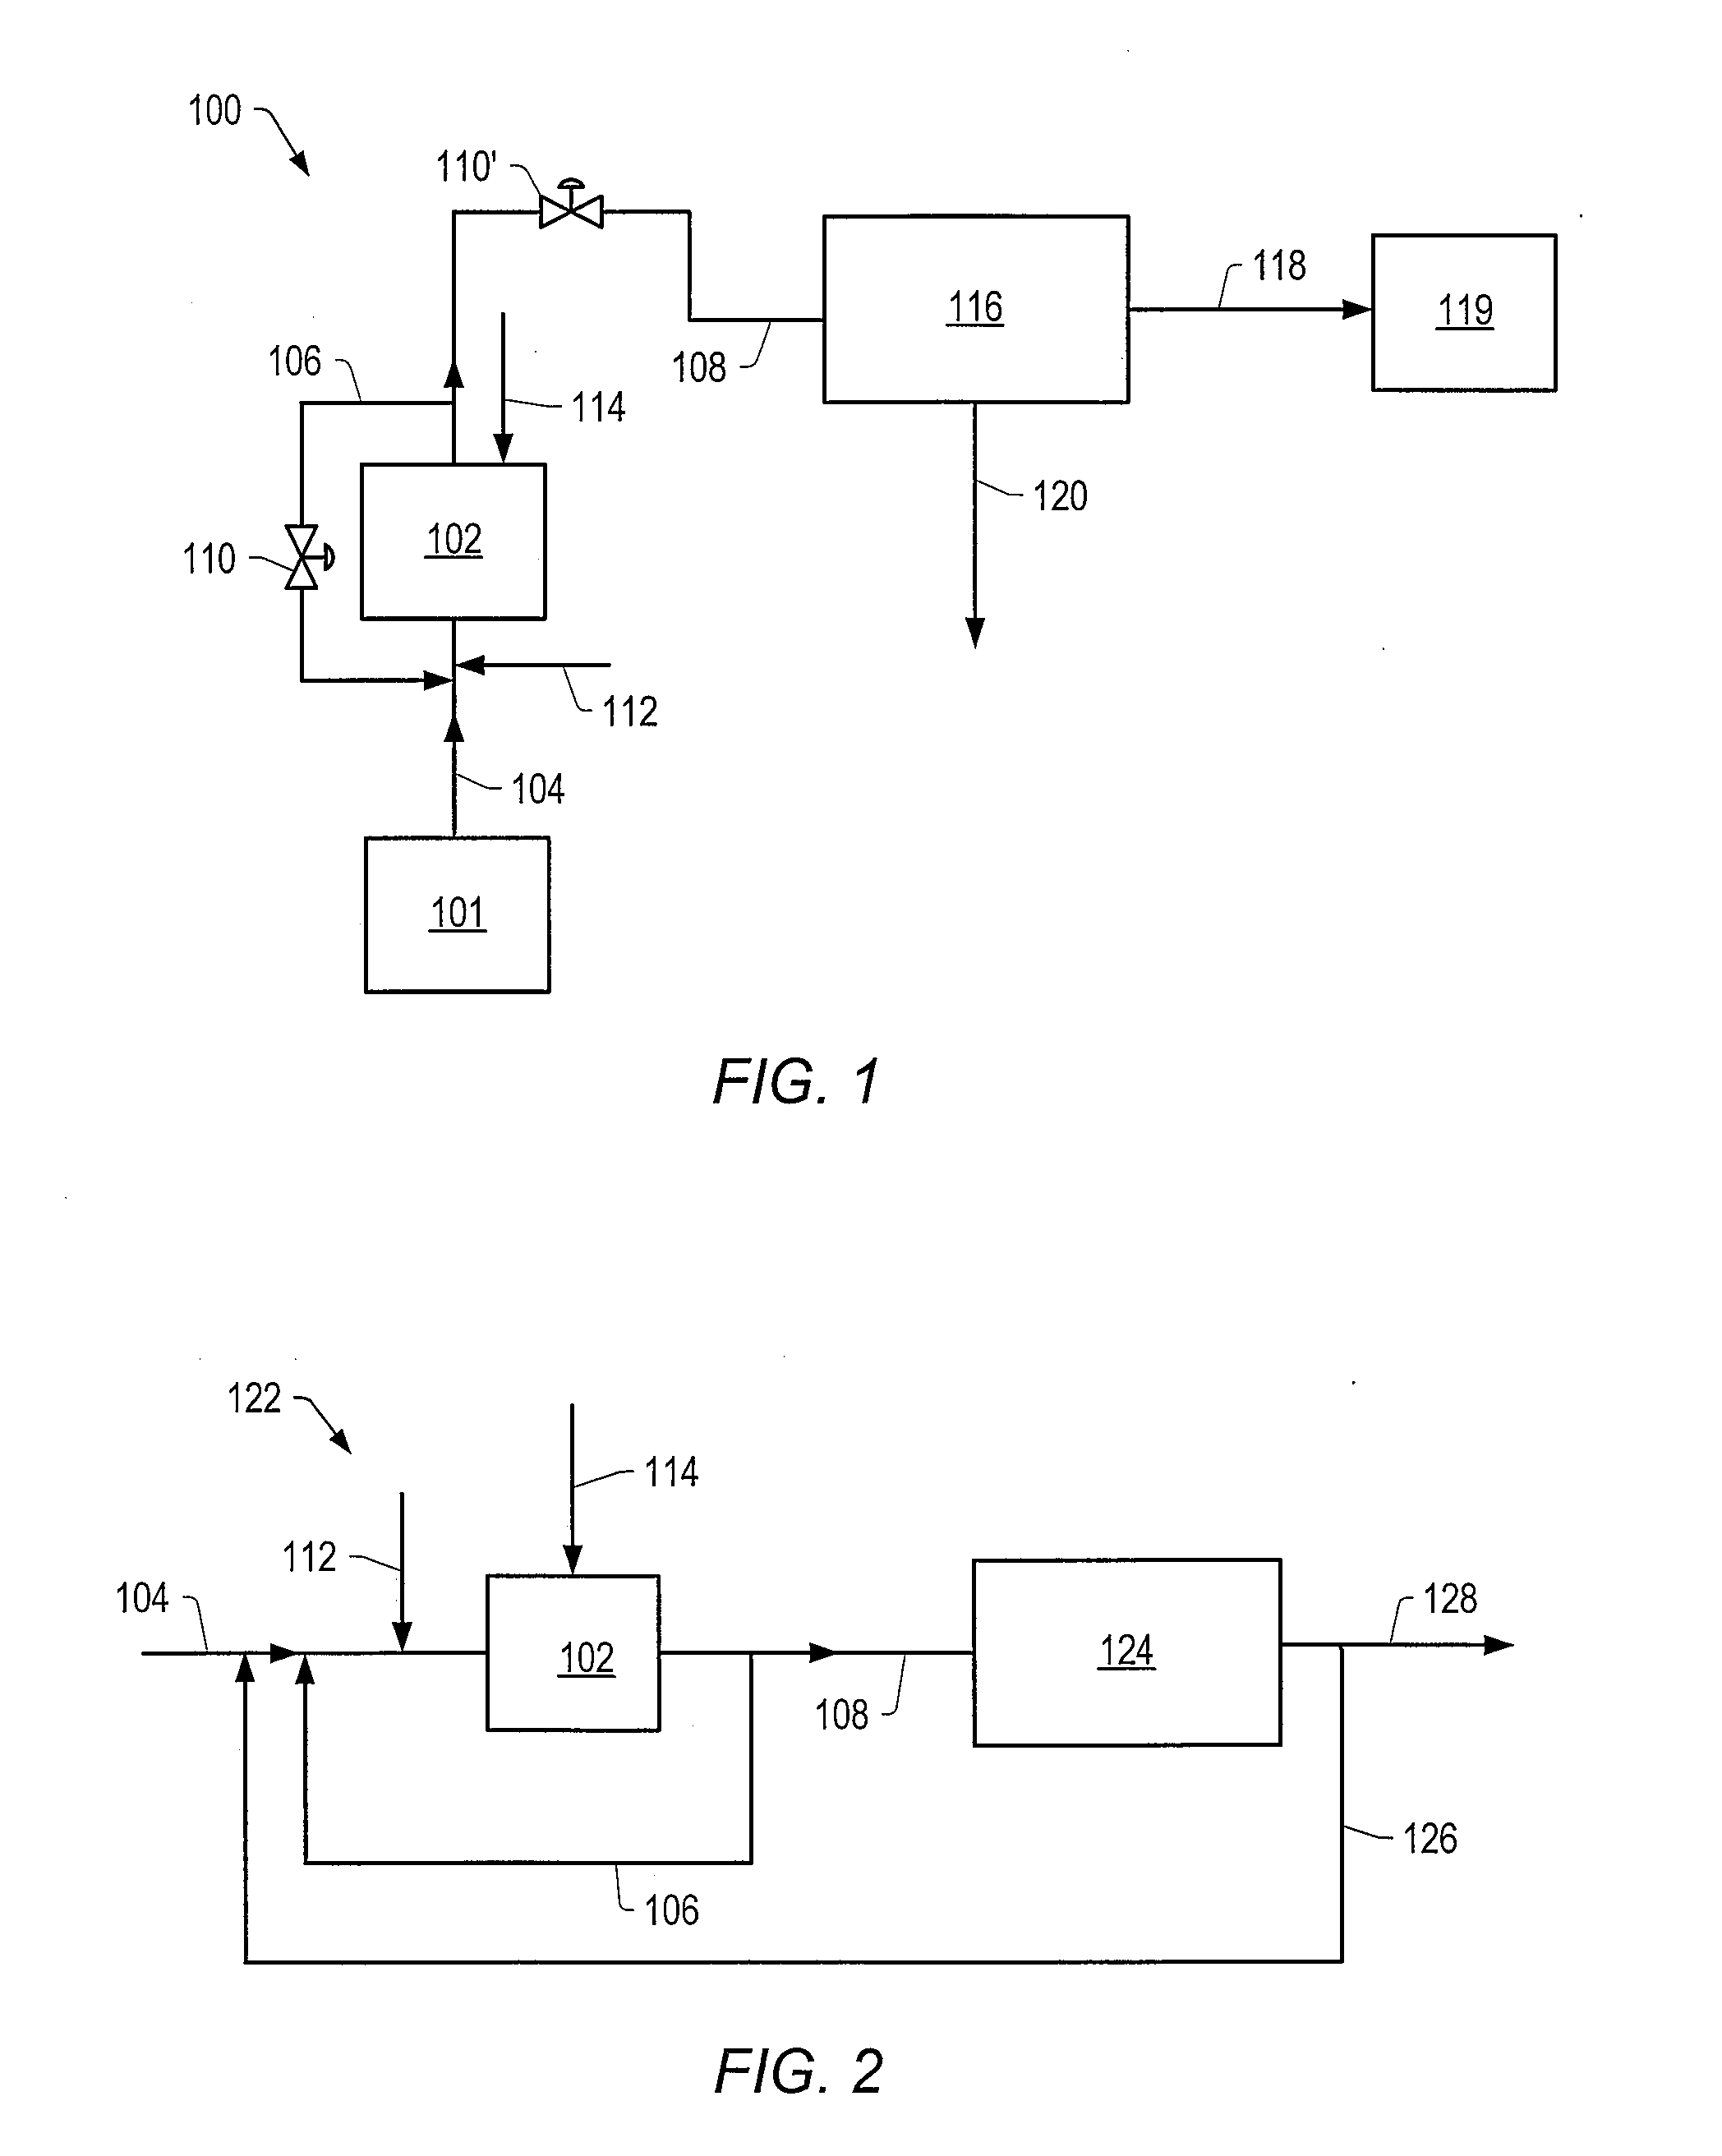 Methods for producing a crude product from selected feed